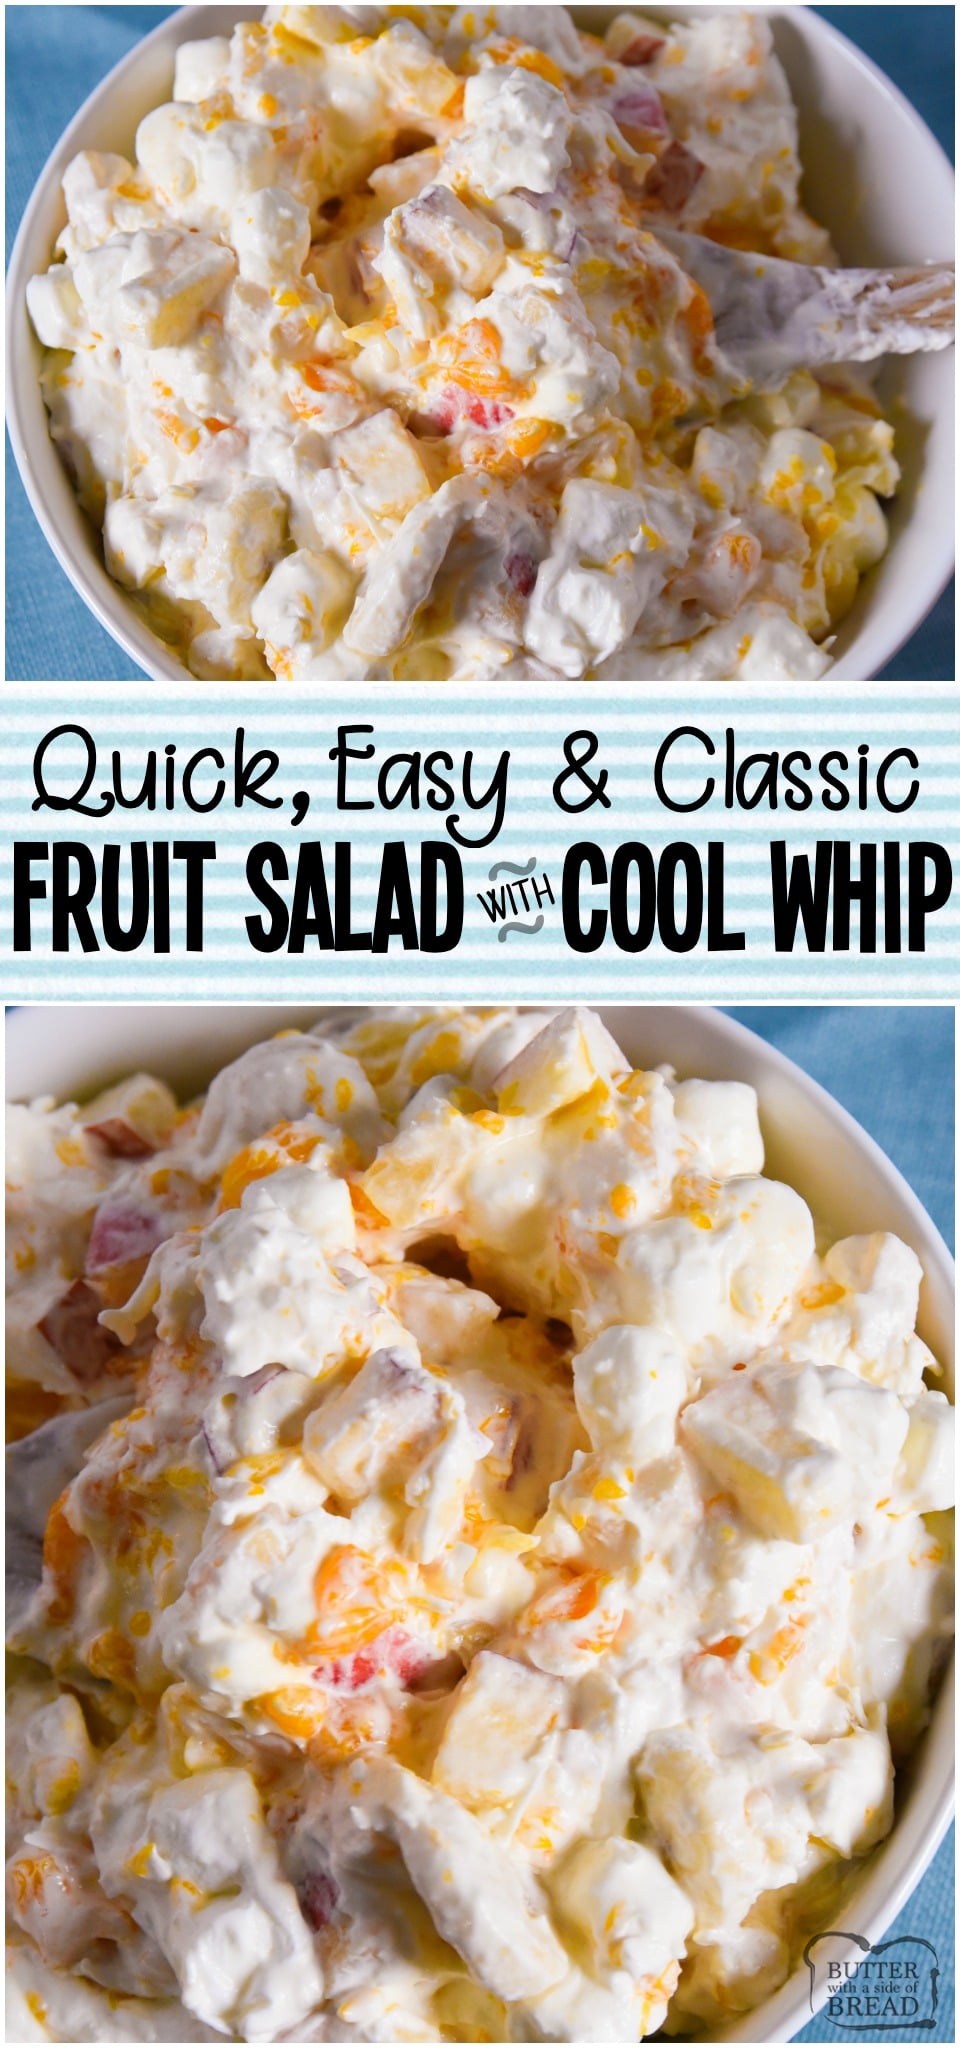 Fruit Salad with Cool Whip made easy in minutes! Classic fruit salad recipe made with ripe fruit and sweet cream. Just like Grandma used to make!